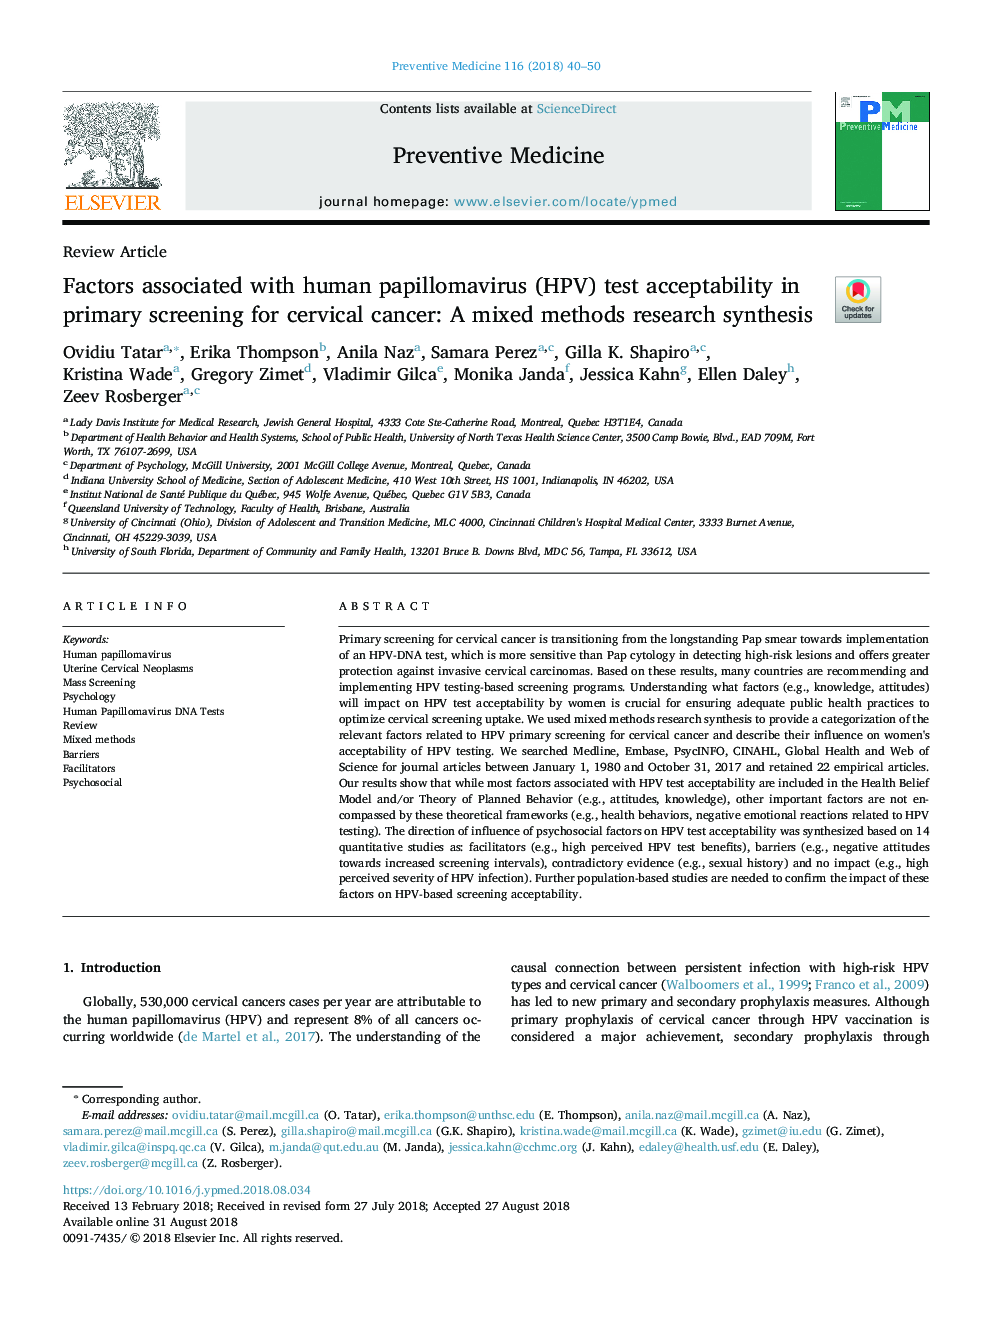 Factors associated with human papillomavirus (HPV) test acceptability in primary screening for cervical cancer: A mixed methods research synthesis